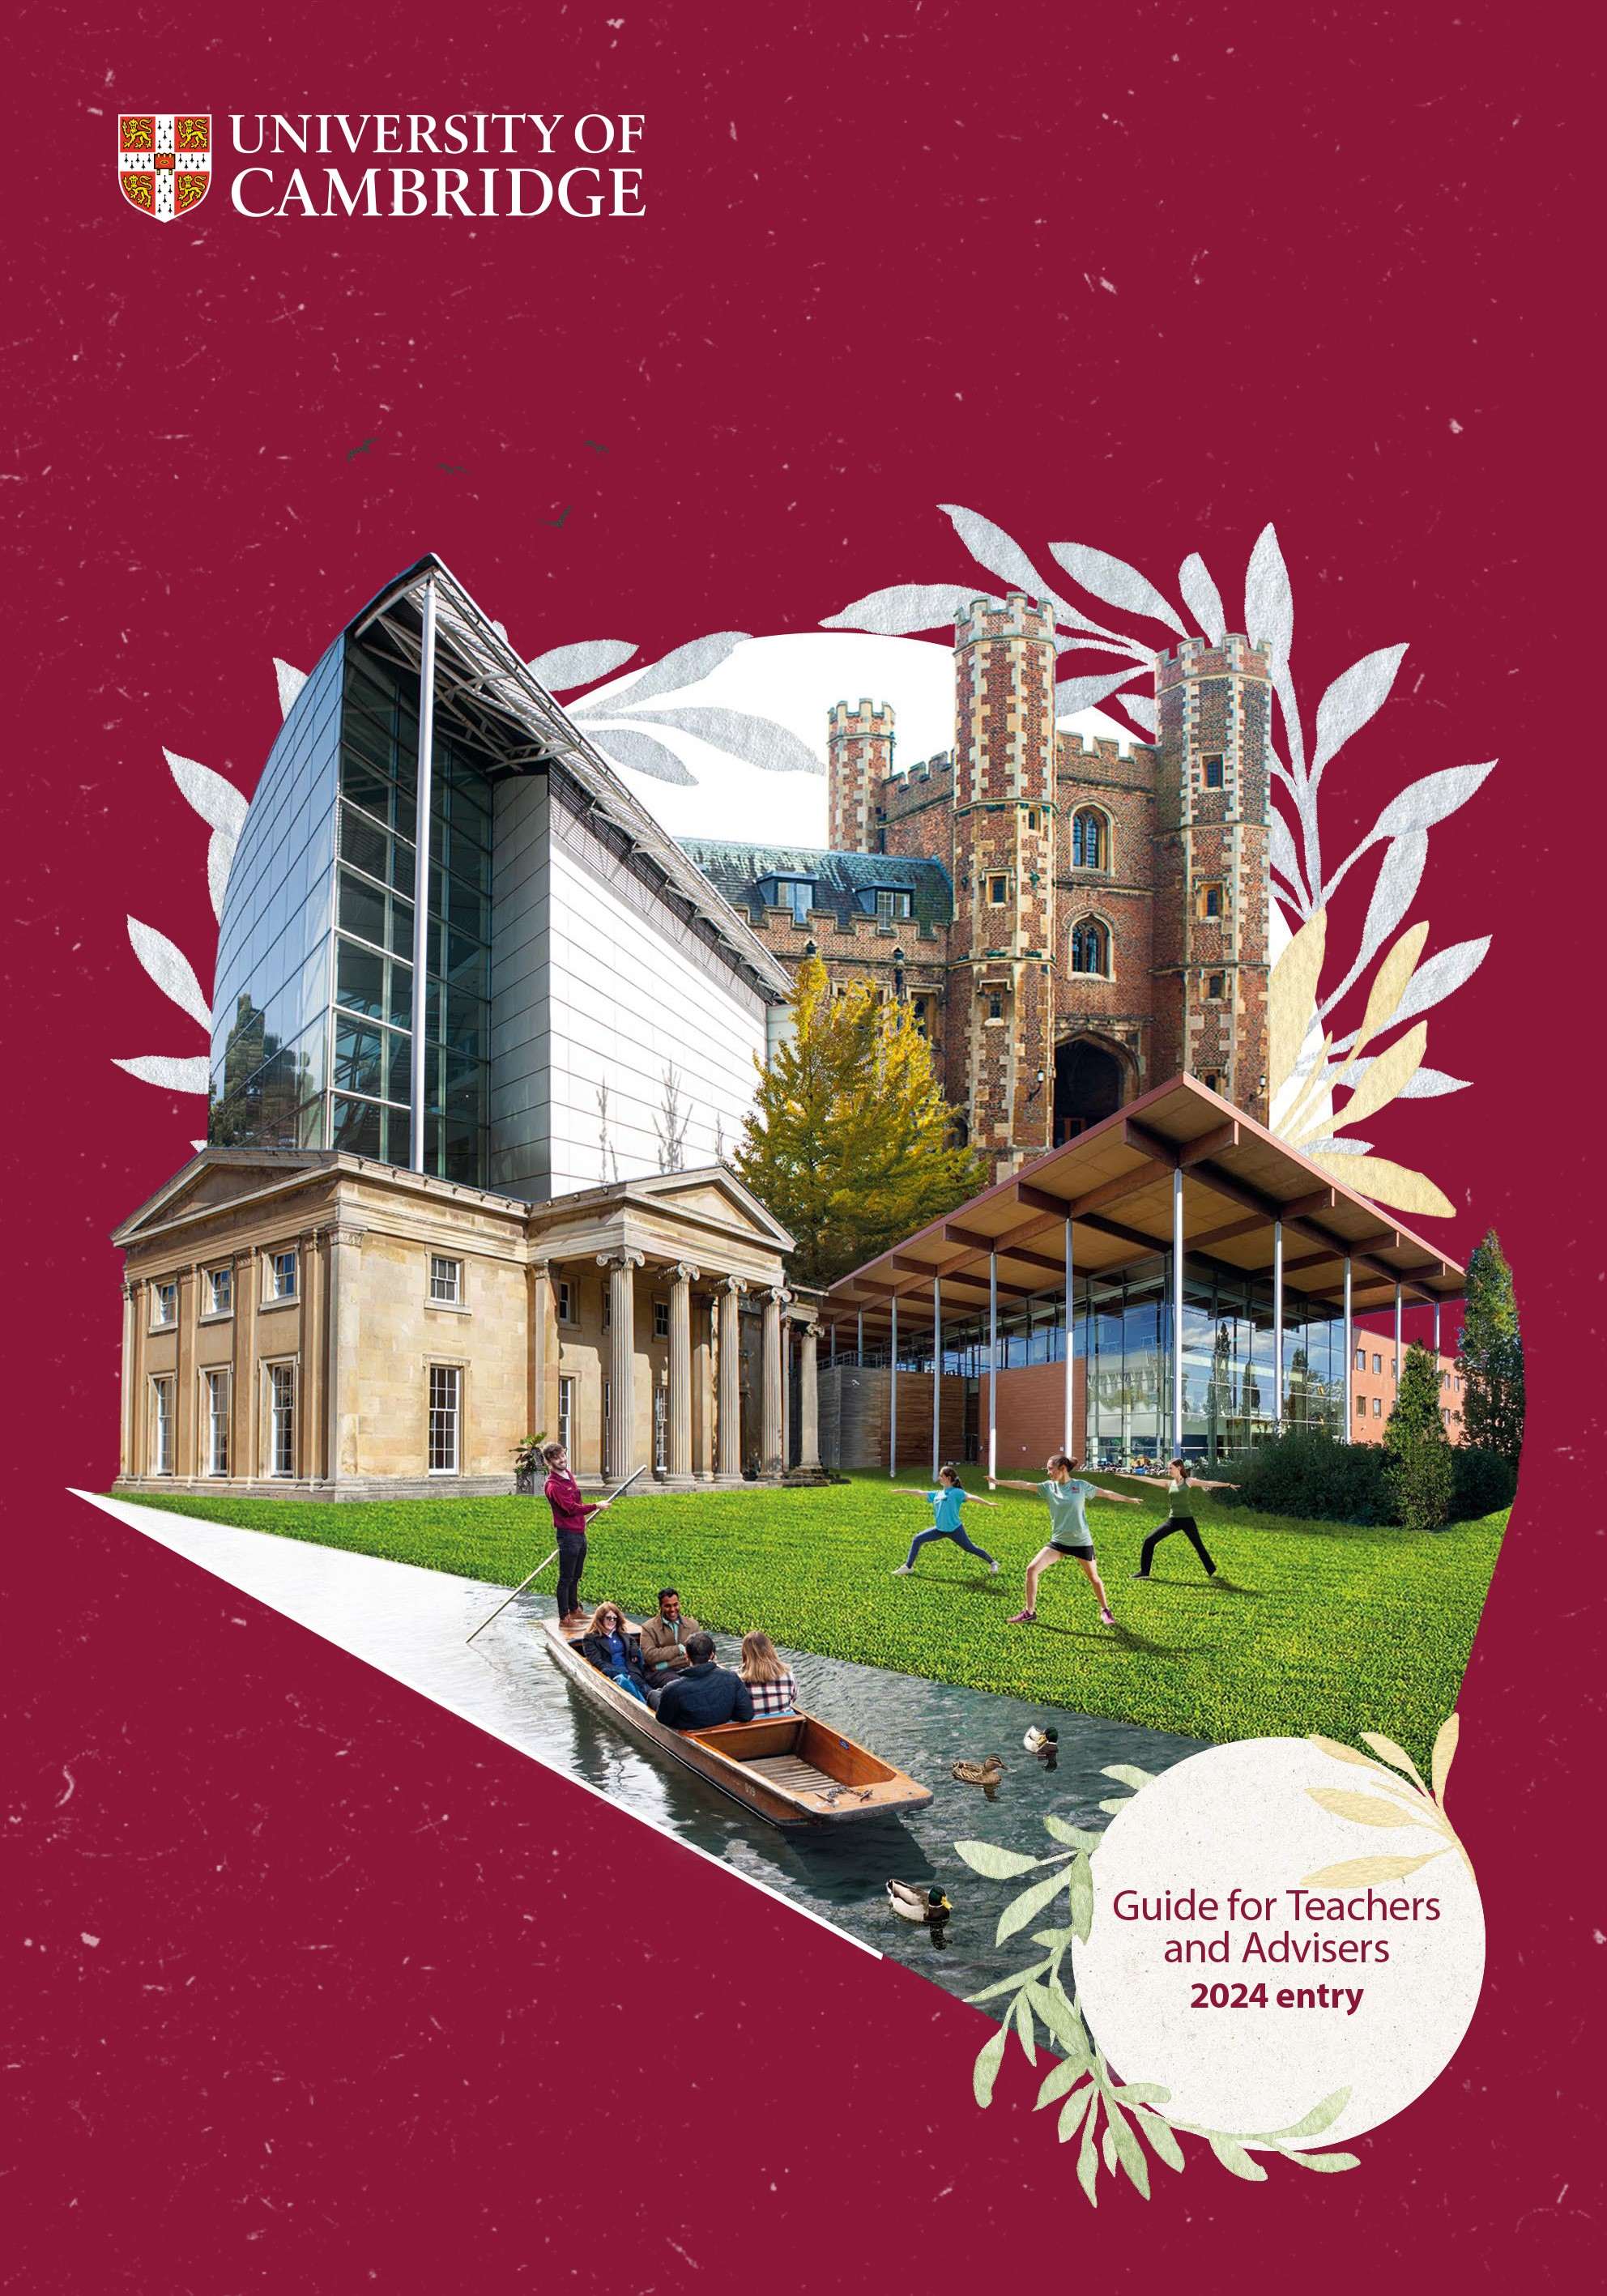 Teachers Guide 2024 cover image of UOC buildings